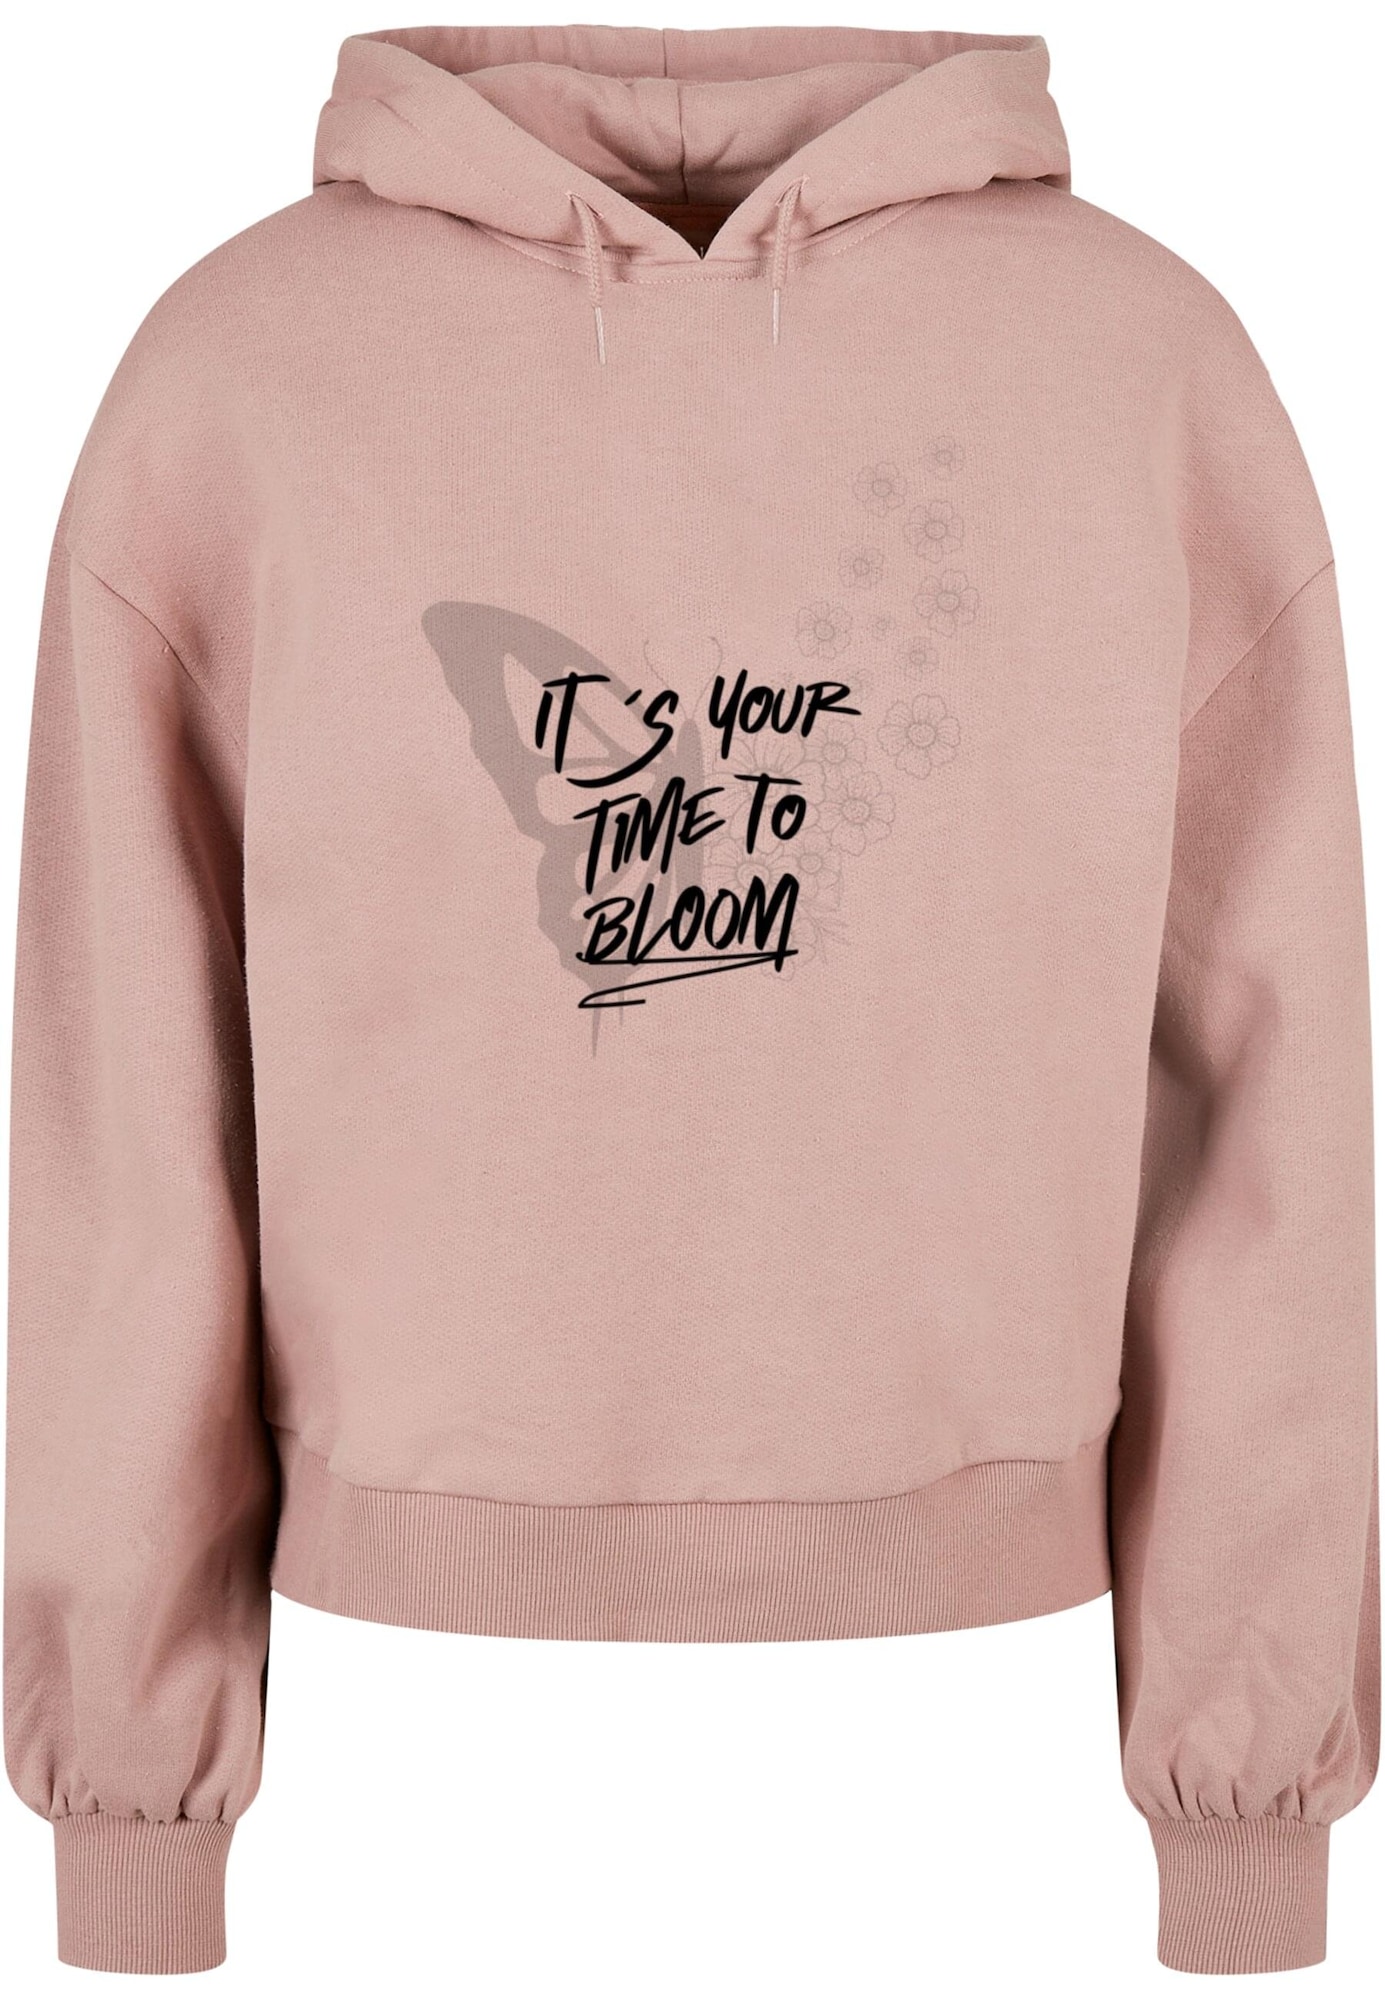 sweat-shirt 'its your time to bloom'